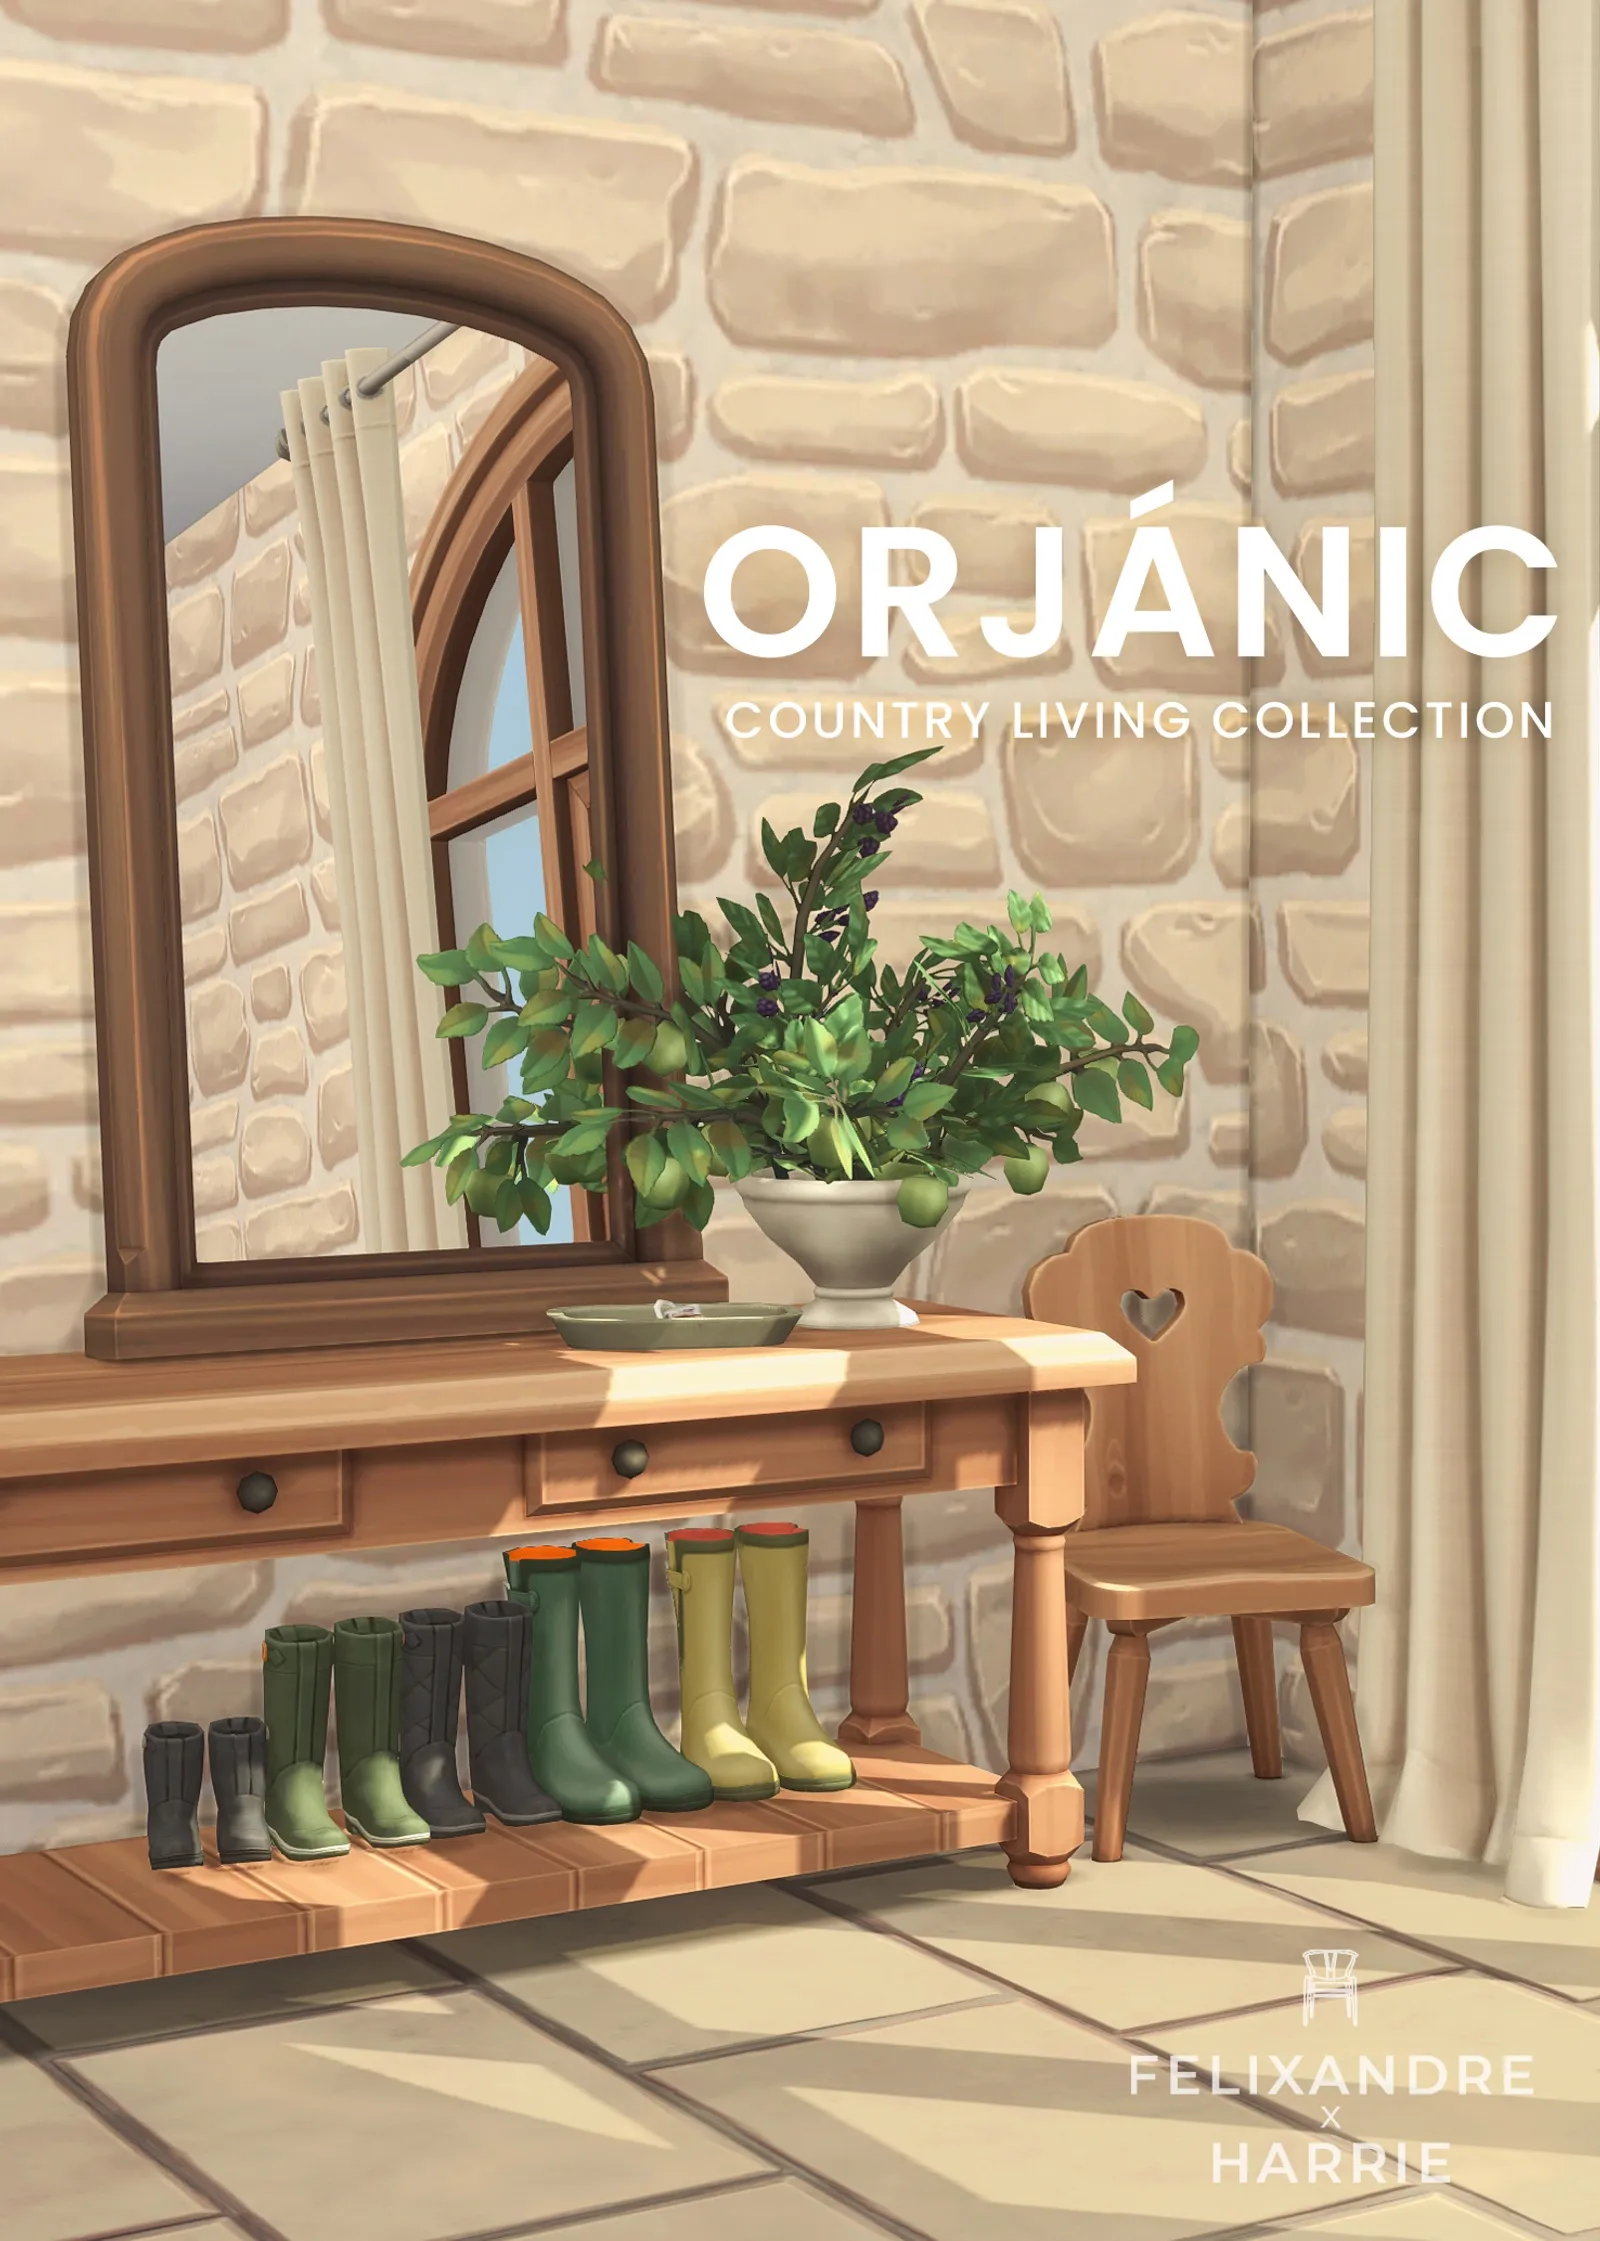 Orjánic - Country Living Collection - Part 2